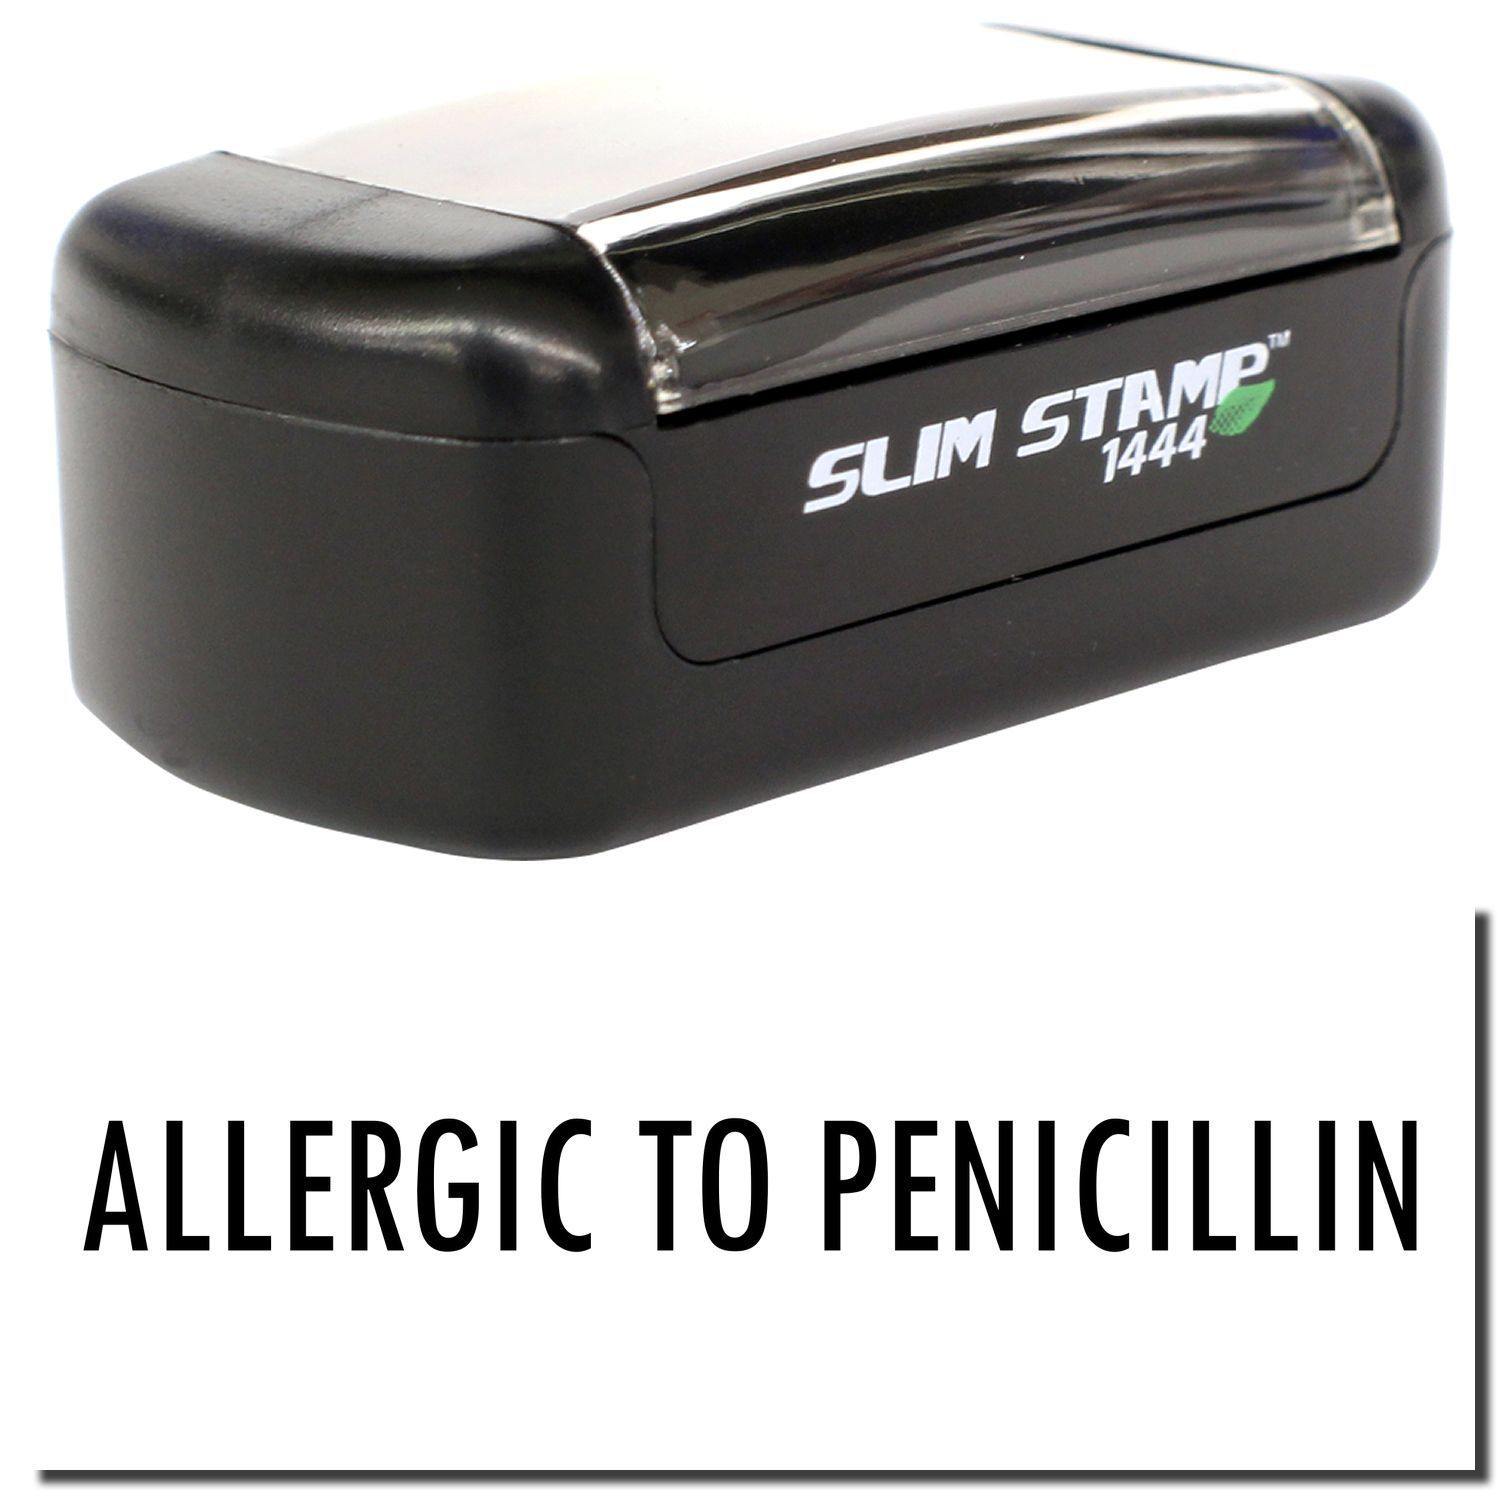 A stock office pre-inked stamp with a stamped image showing how the text "ALLERGIC TO PENICILLIN" is displayed after stamping.